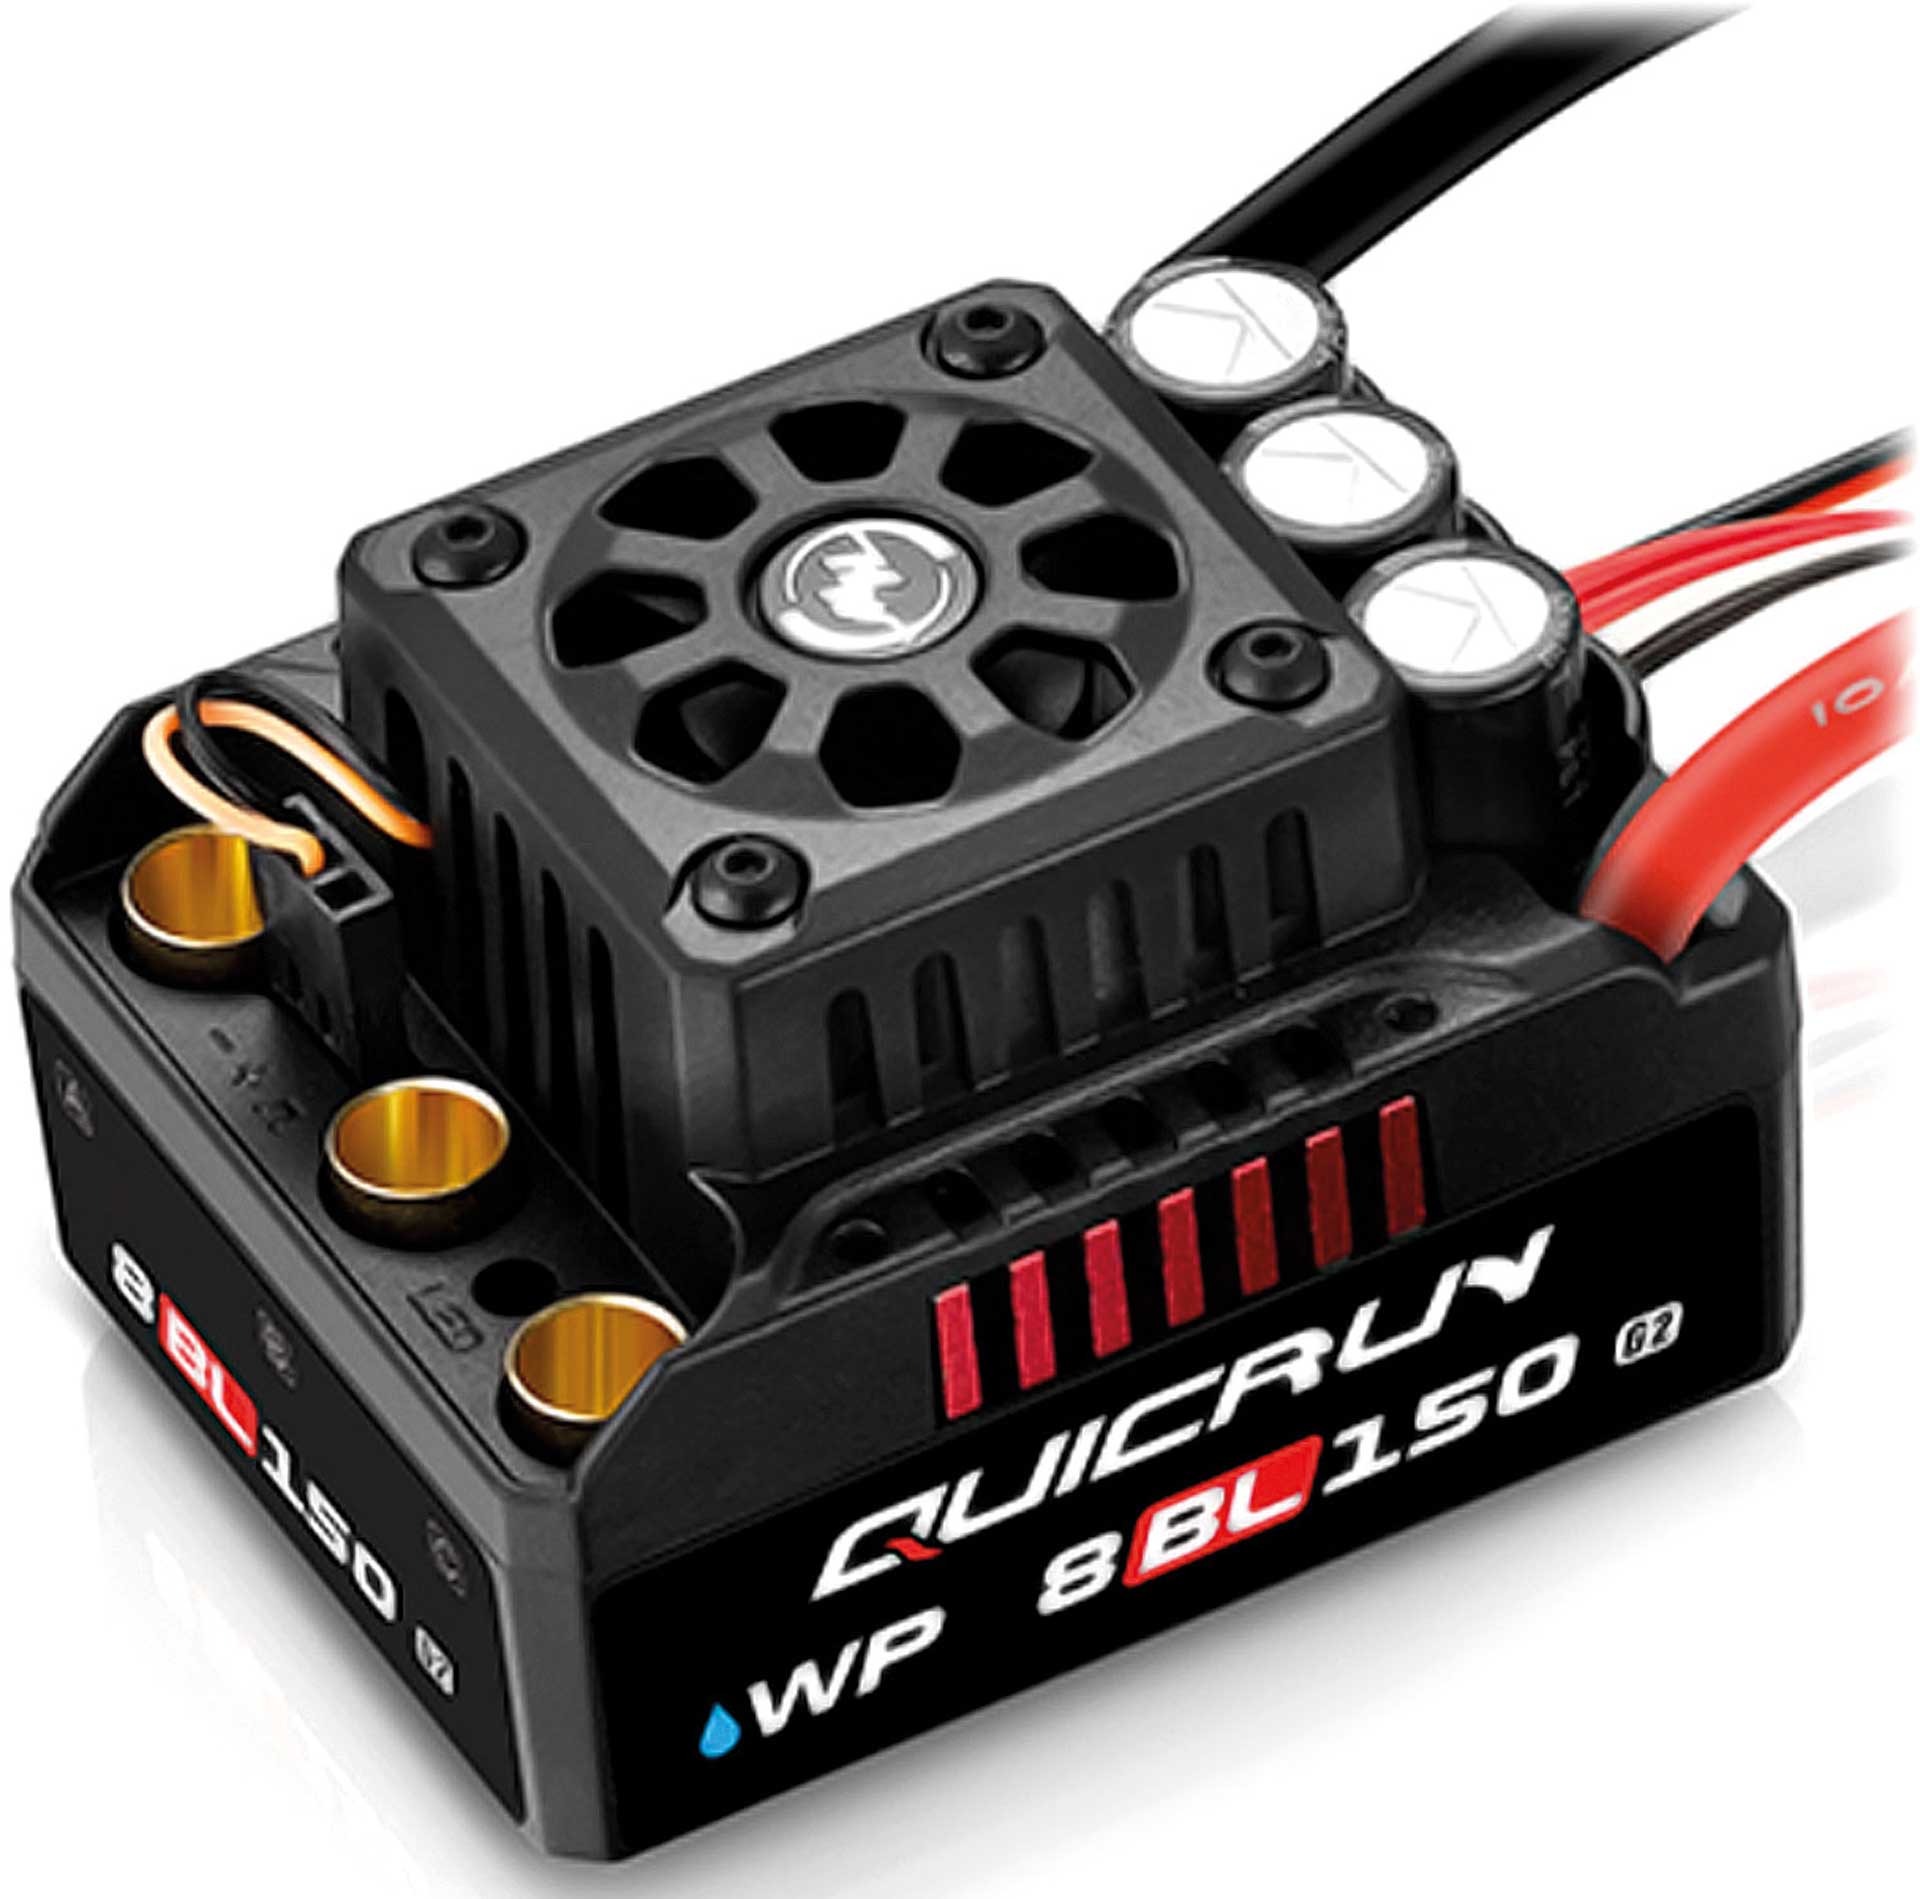 HOBBYWING QuicRun WP8BL150 G2 brushless speed controller 150A 3-6s for 1:8